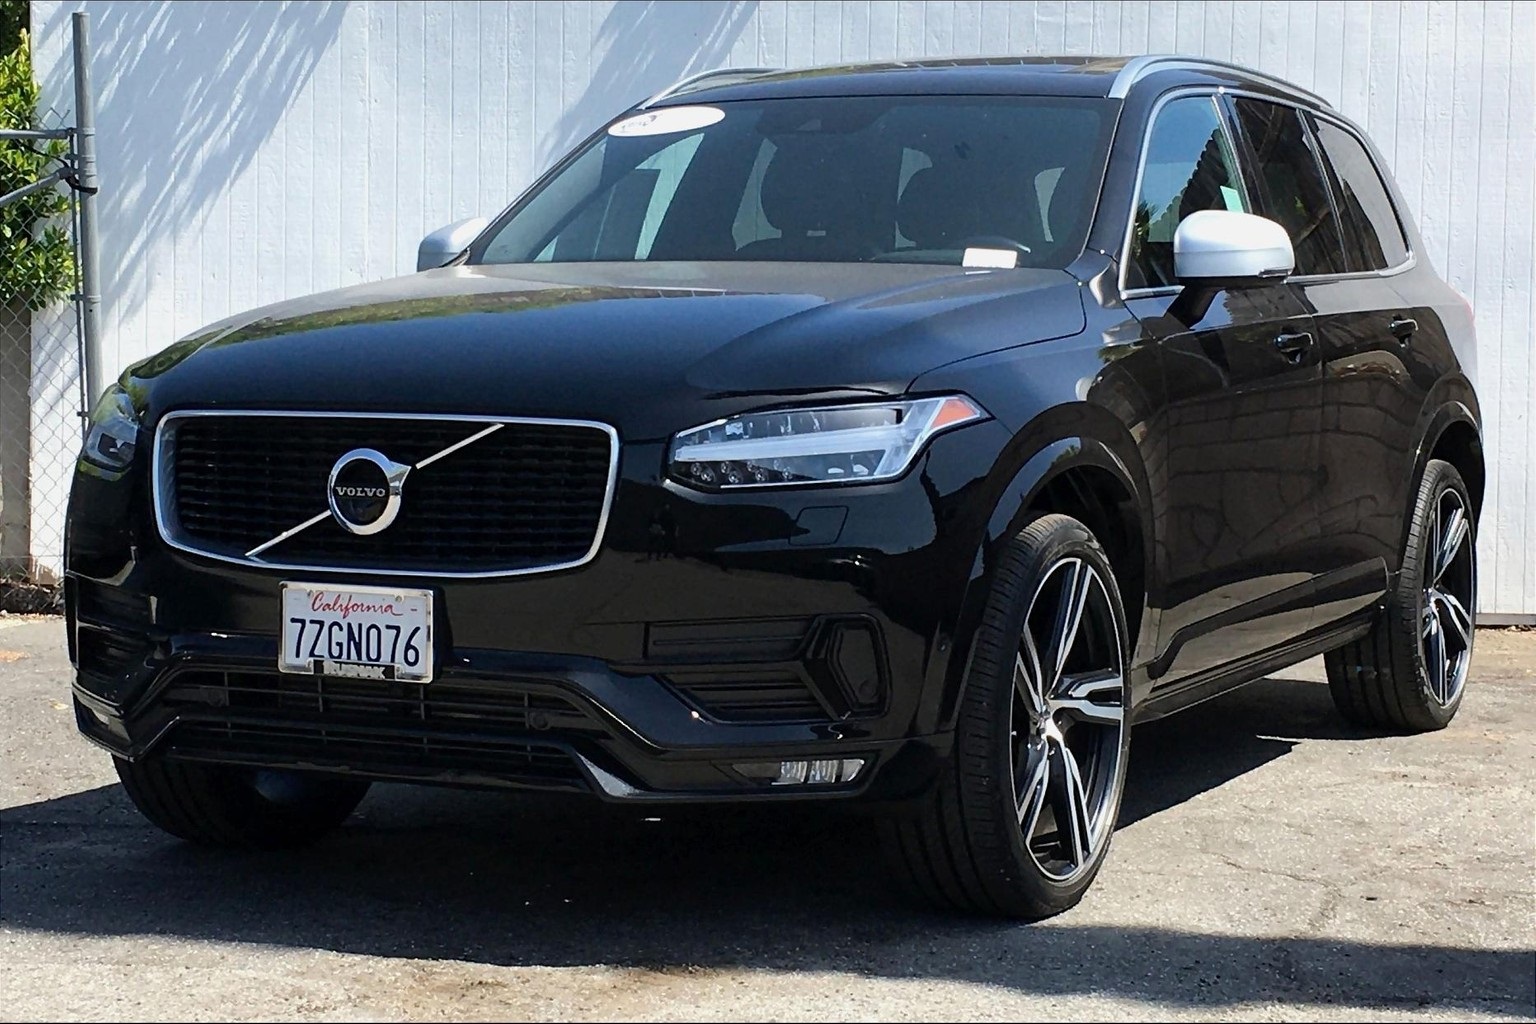 Certified Pre-Owned 2017 Volvo XC90 T5 R-Design 4D Sport Utility in ...